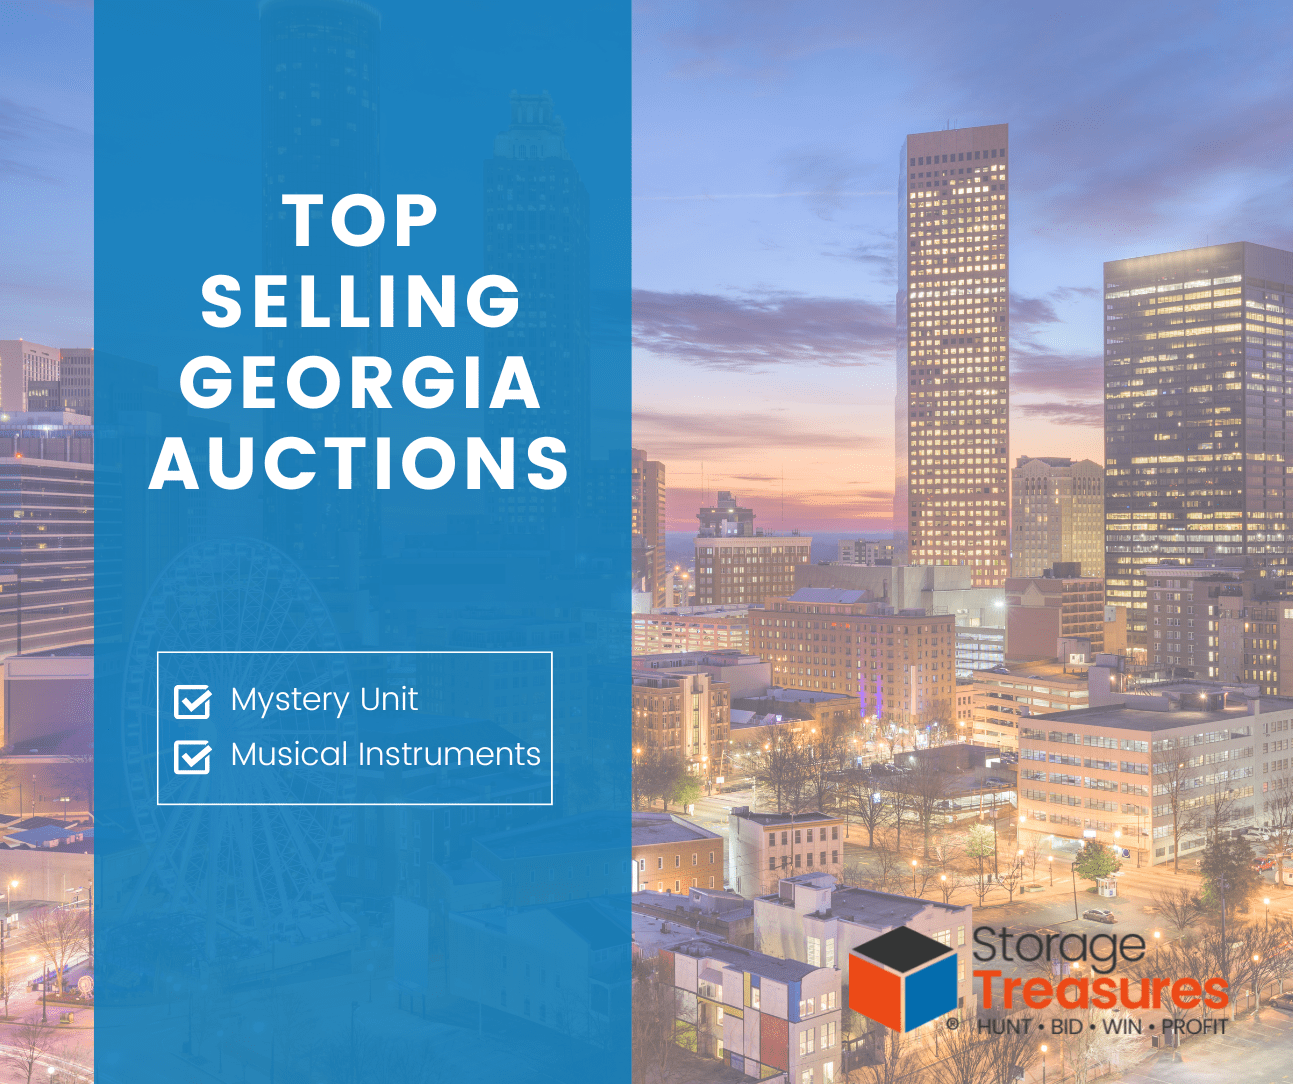 Check out our top selling storage auctions in georgia